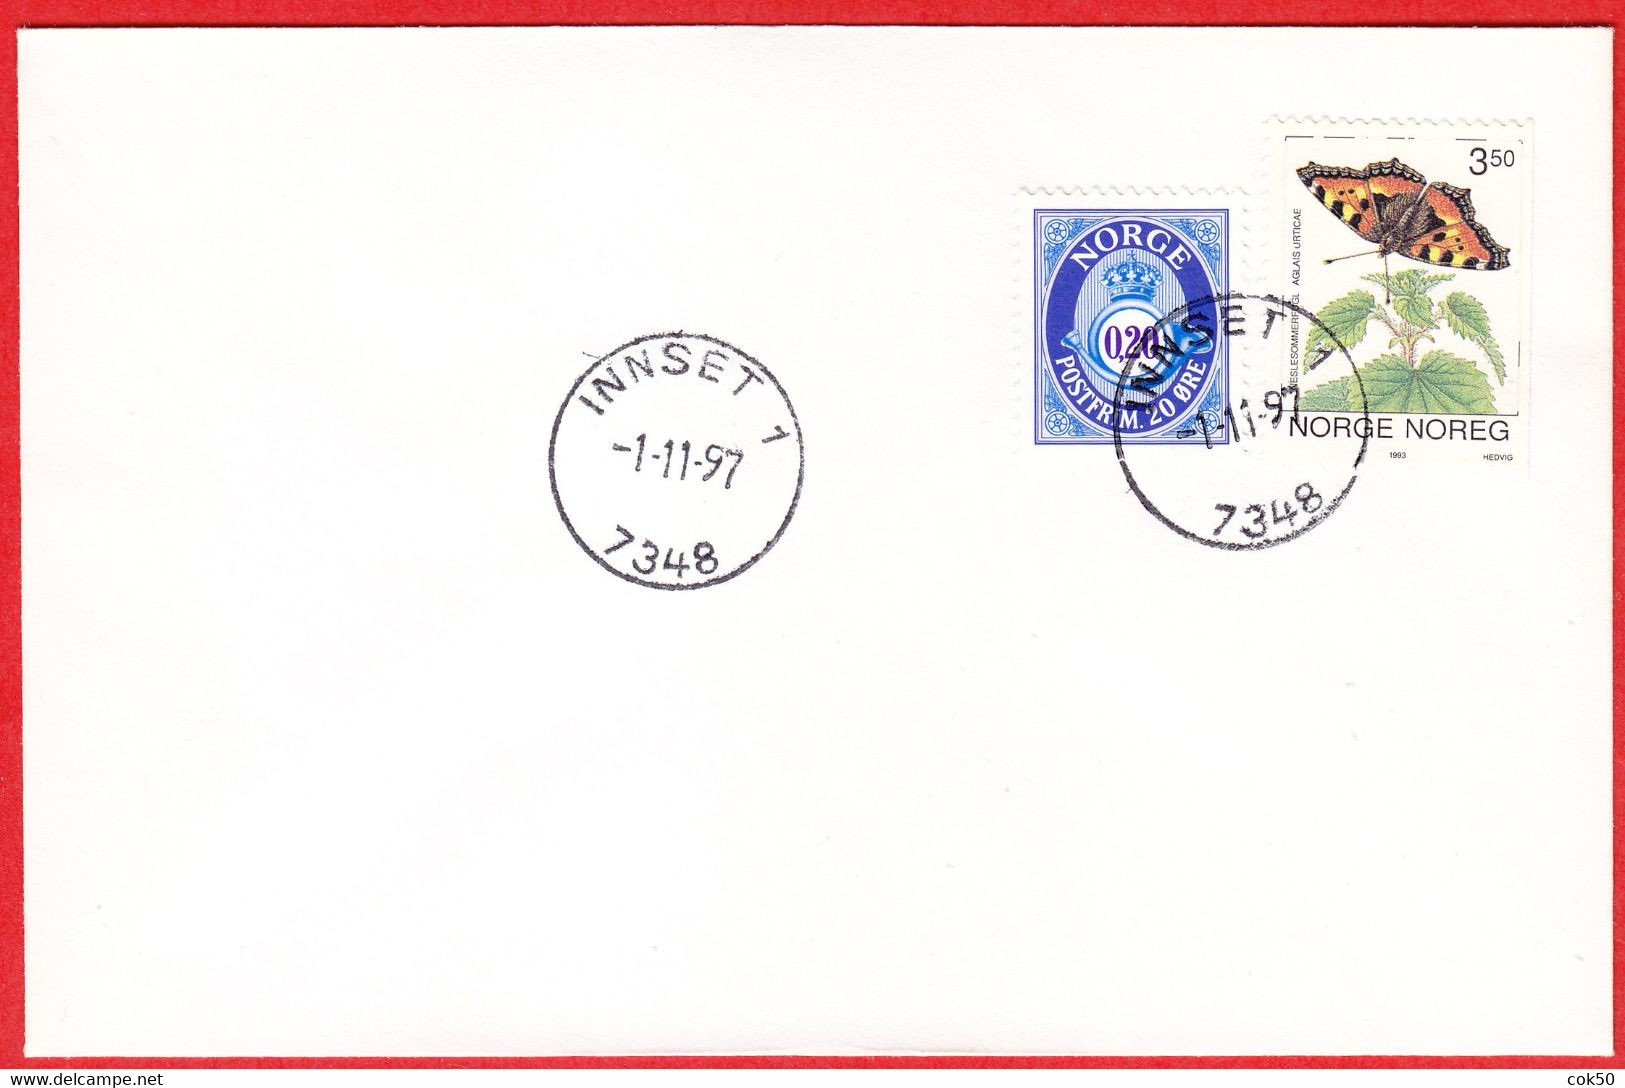 NORWAY -  7348 INNSET 1 (Trøndelag County) - Last Day/postoffice Closed On 1997.11.01 - Local Post Stamps